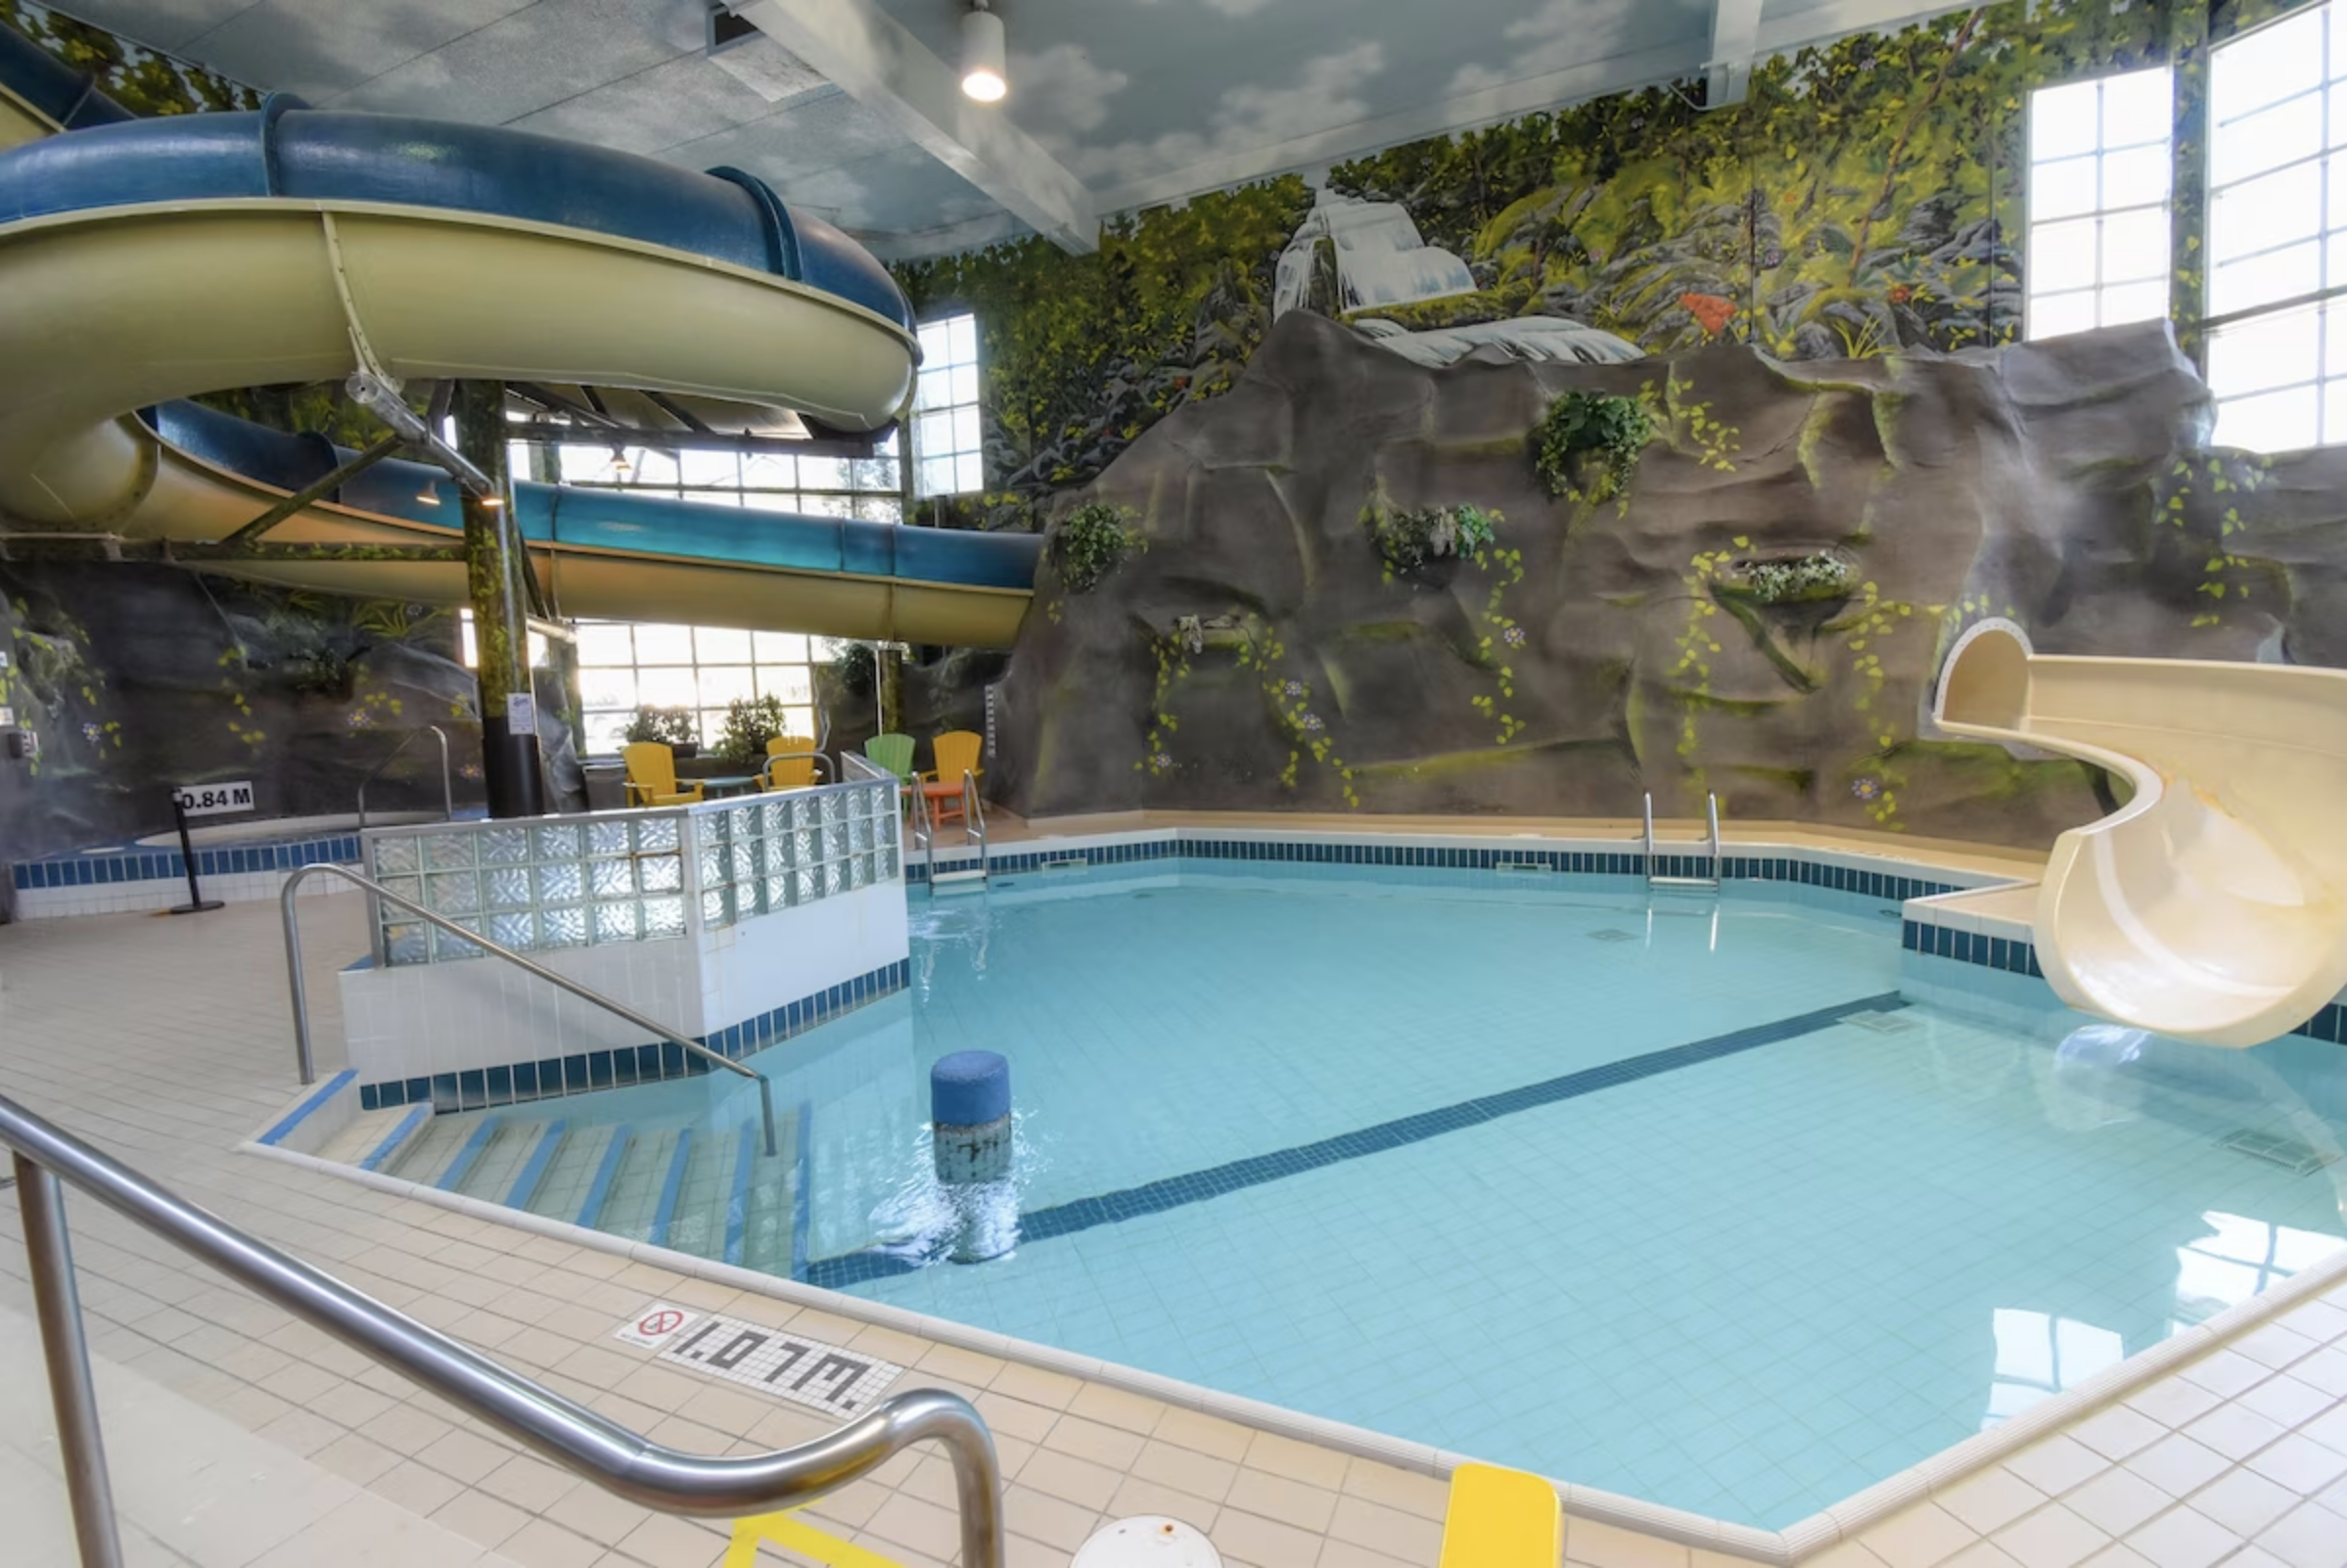 Canad Inns Destination Centre Windsor Park Pool and Waterslide